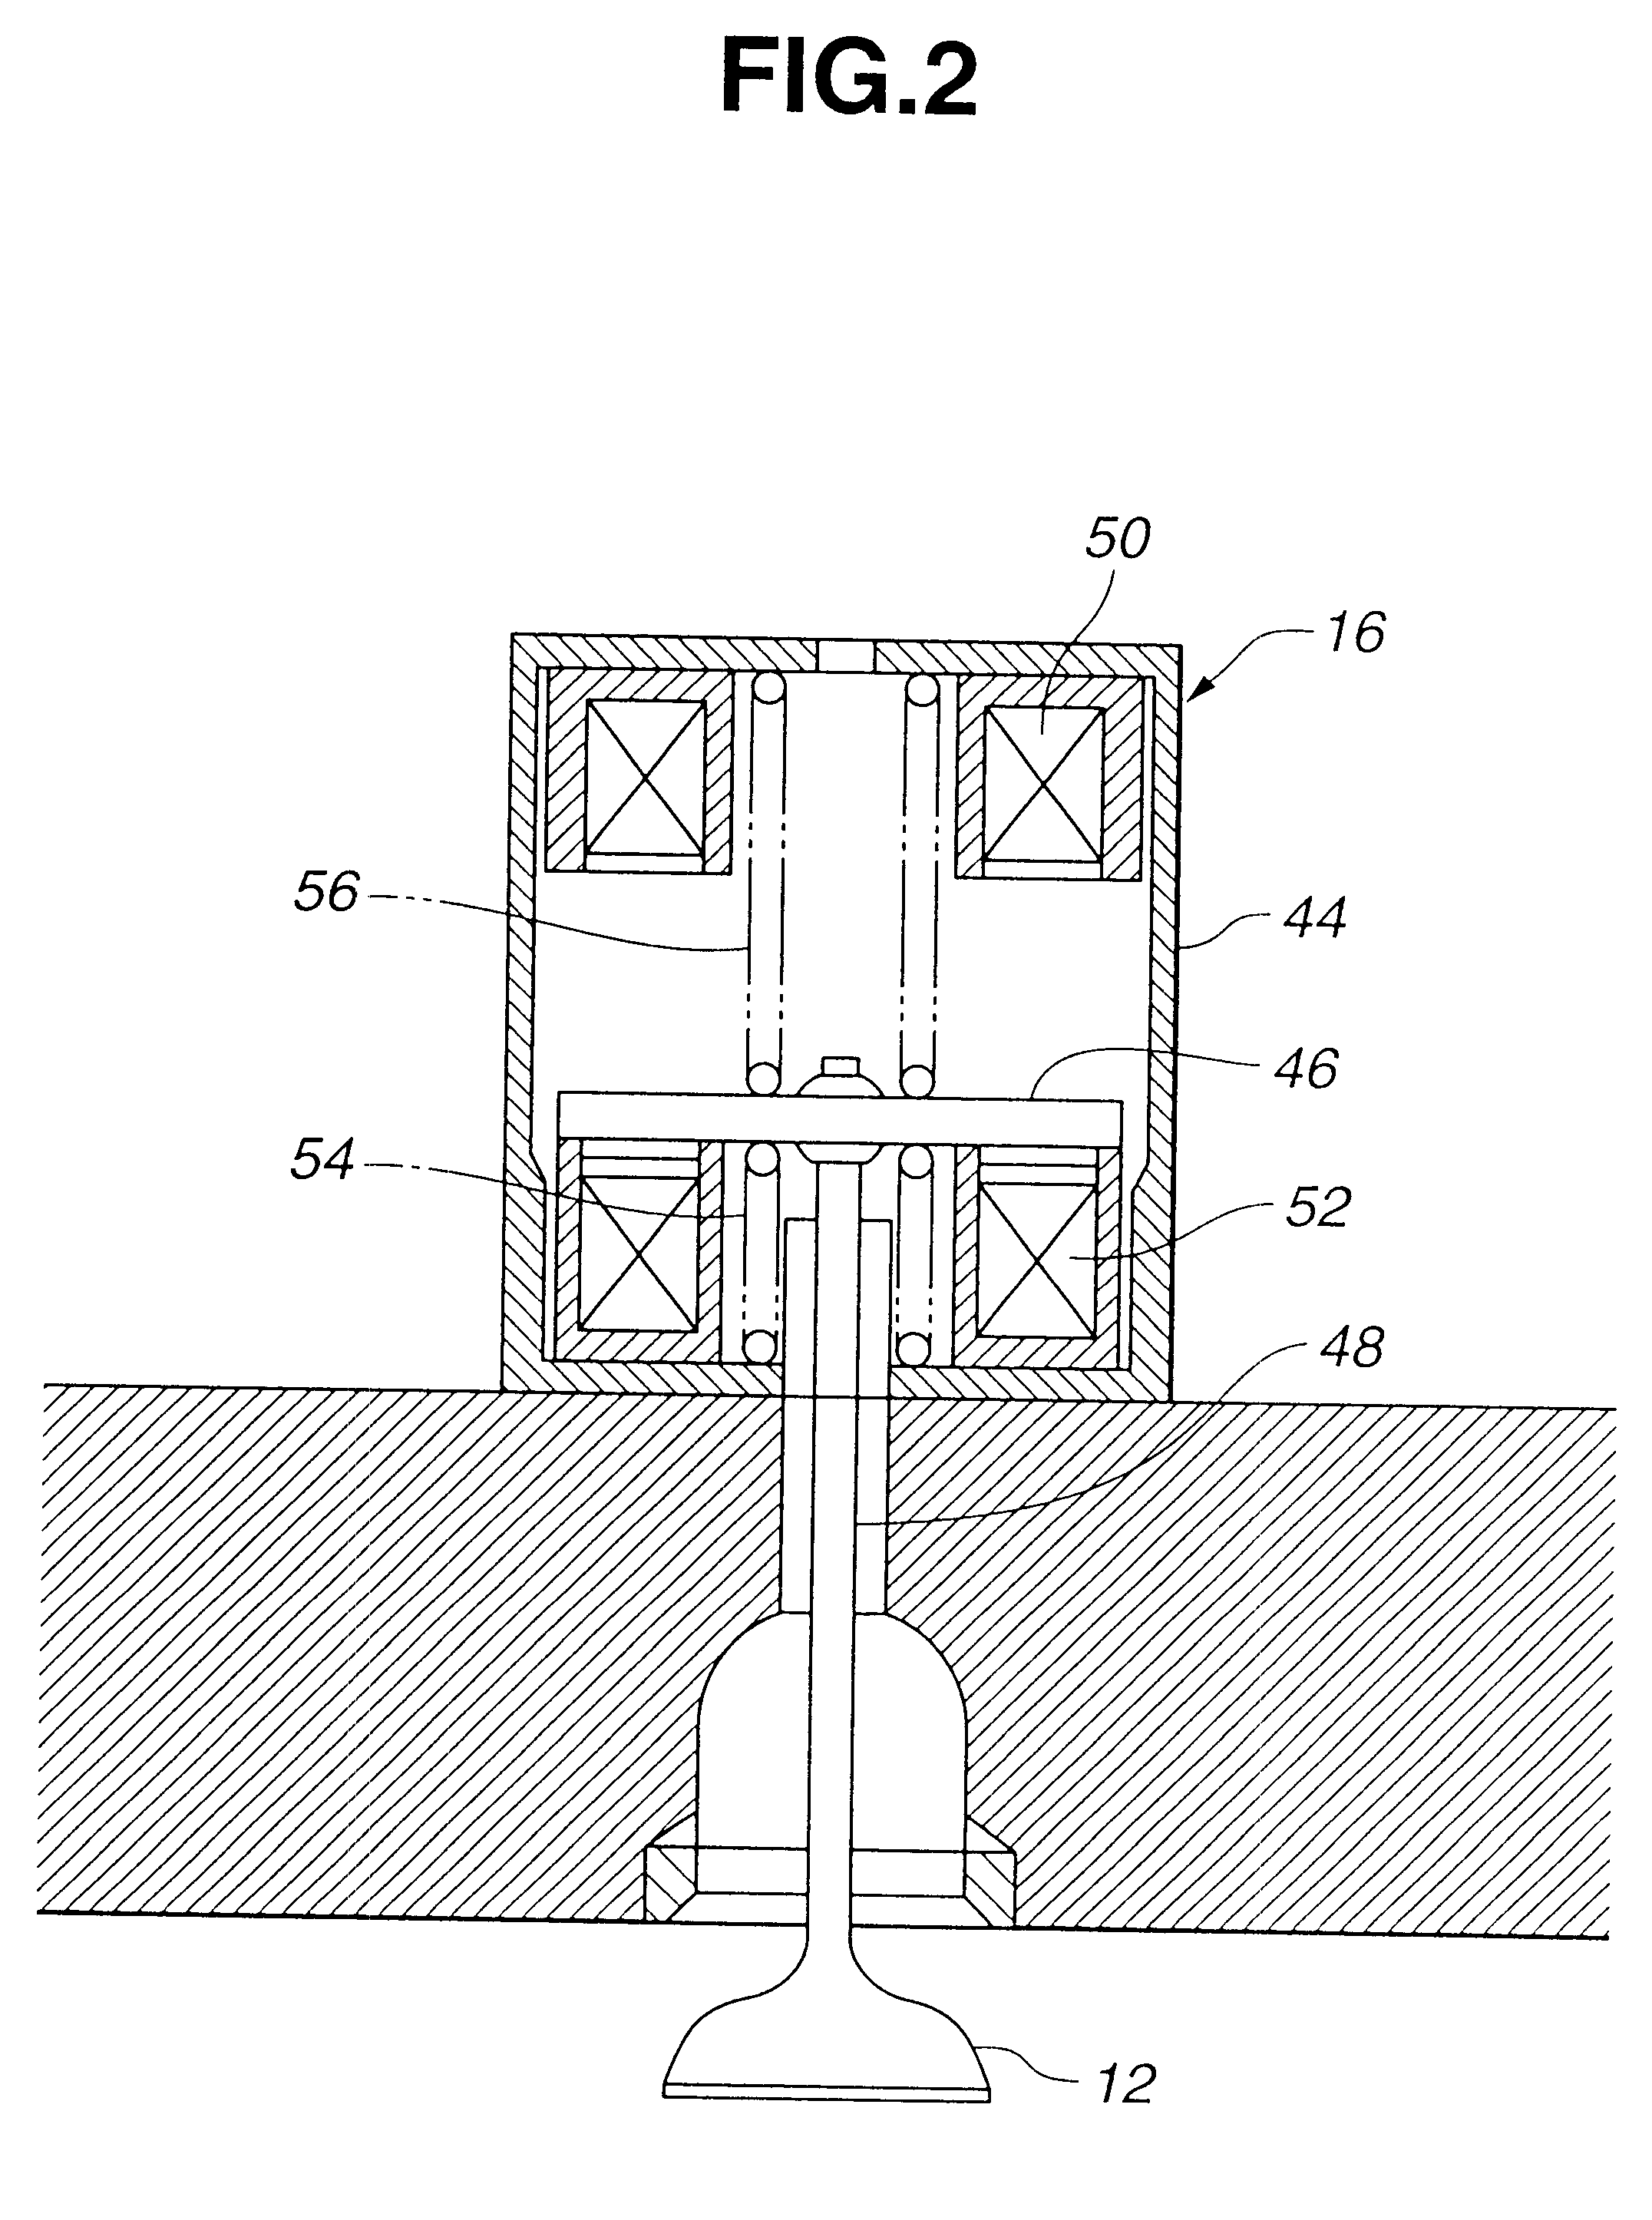 Intake air control system of engine